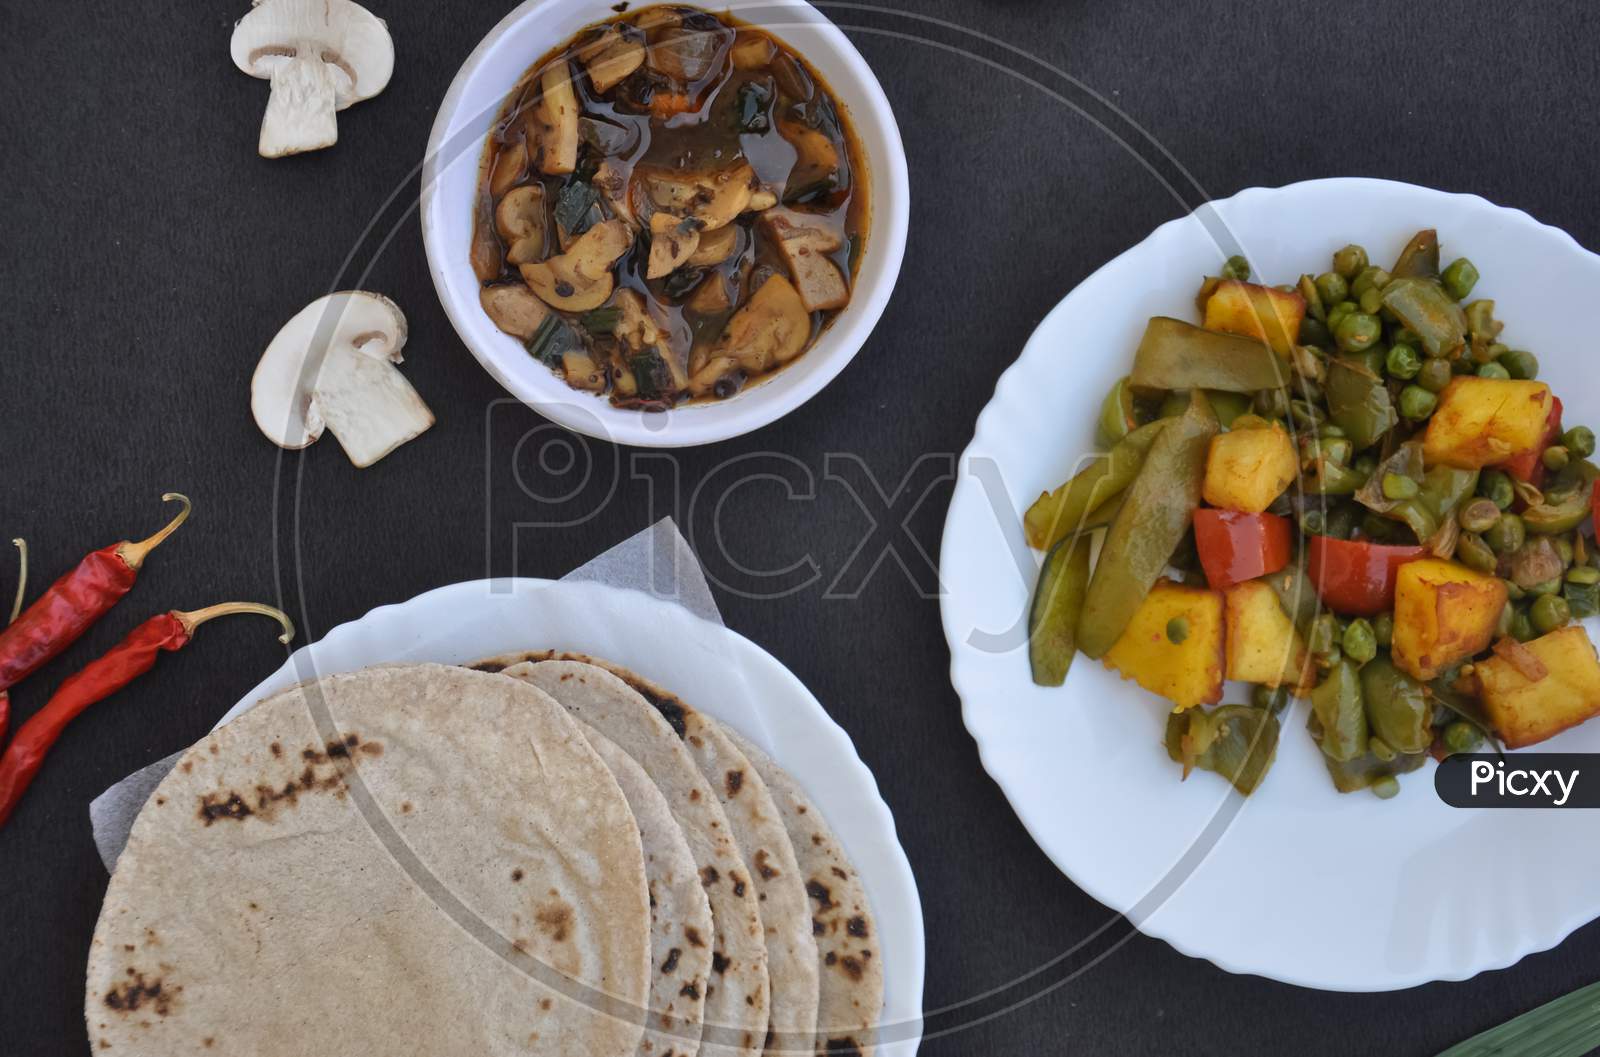 Top view of matar paneer mix veg, mushroom soup and roti (Indian bread) over black background.